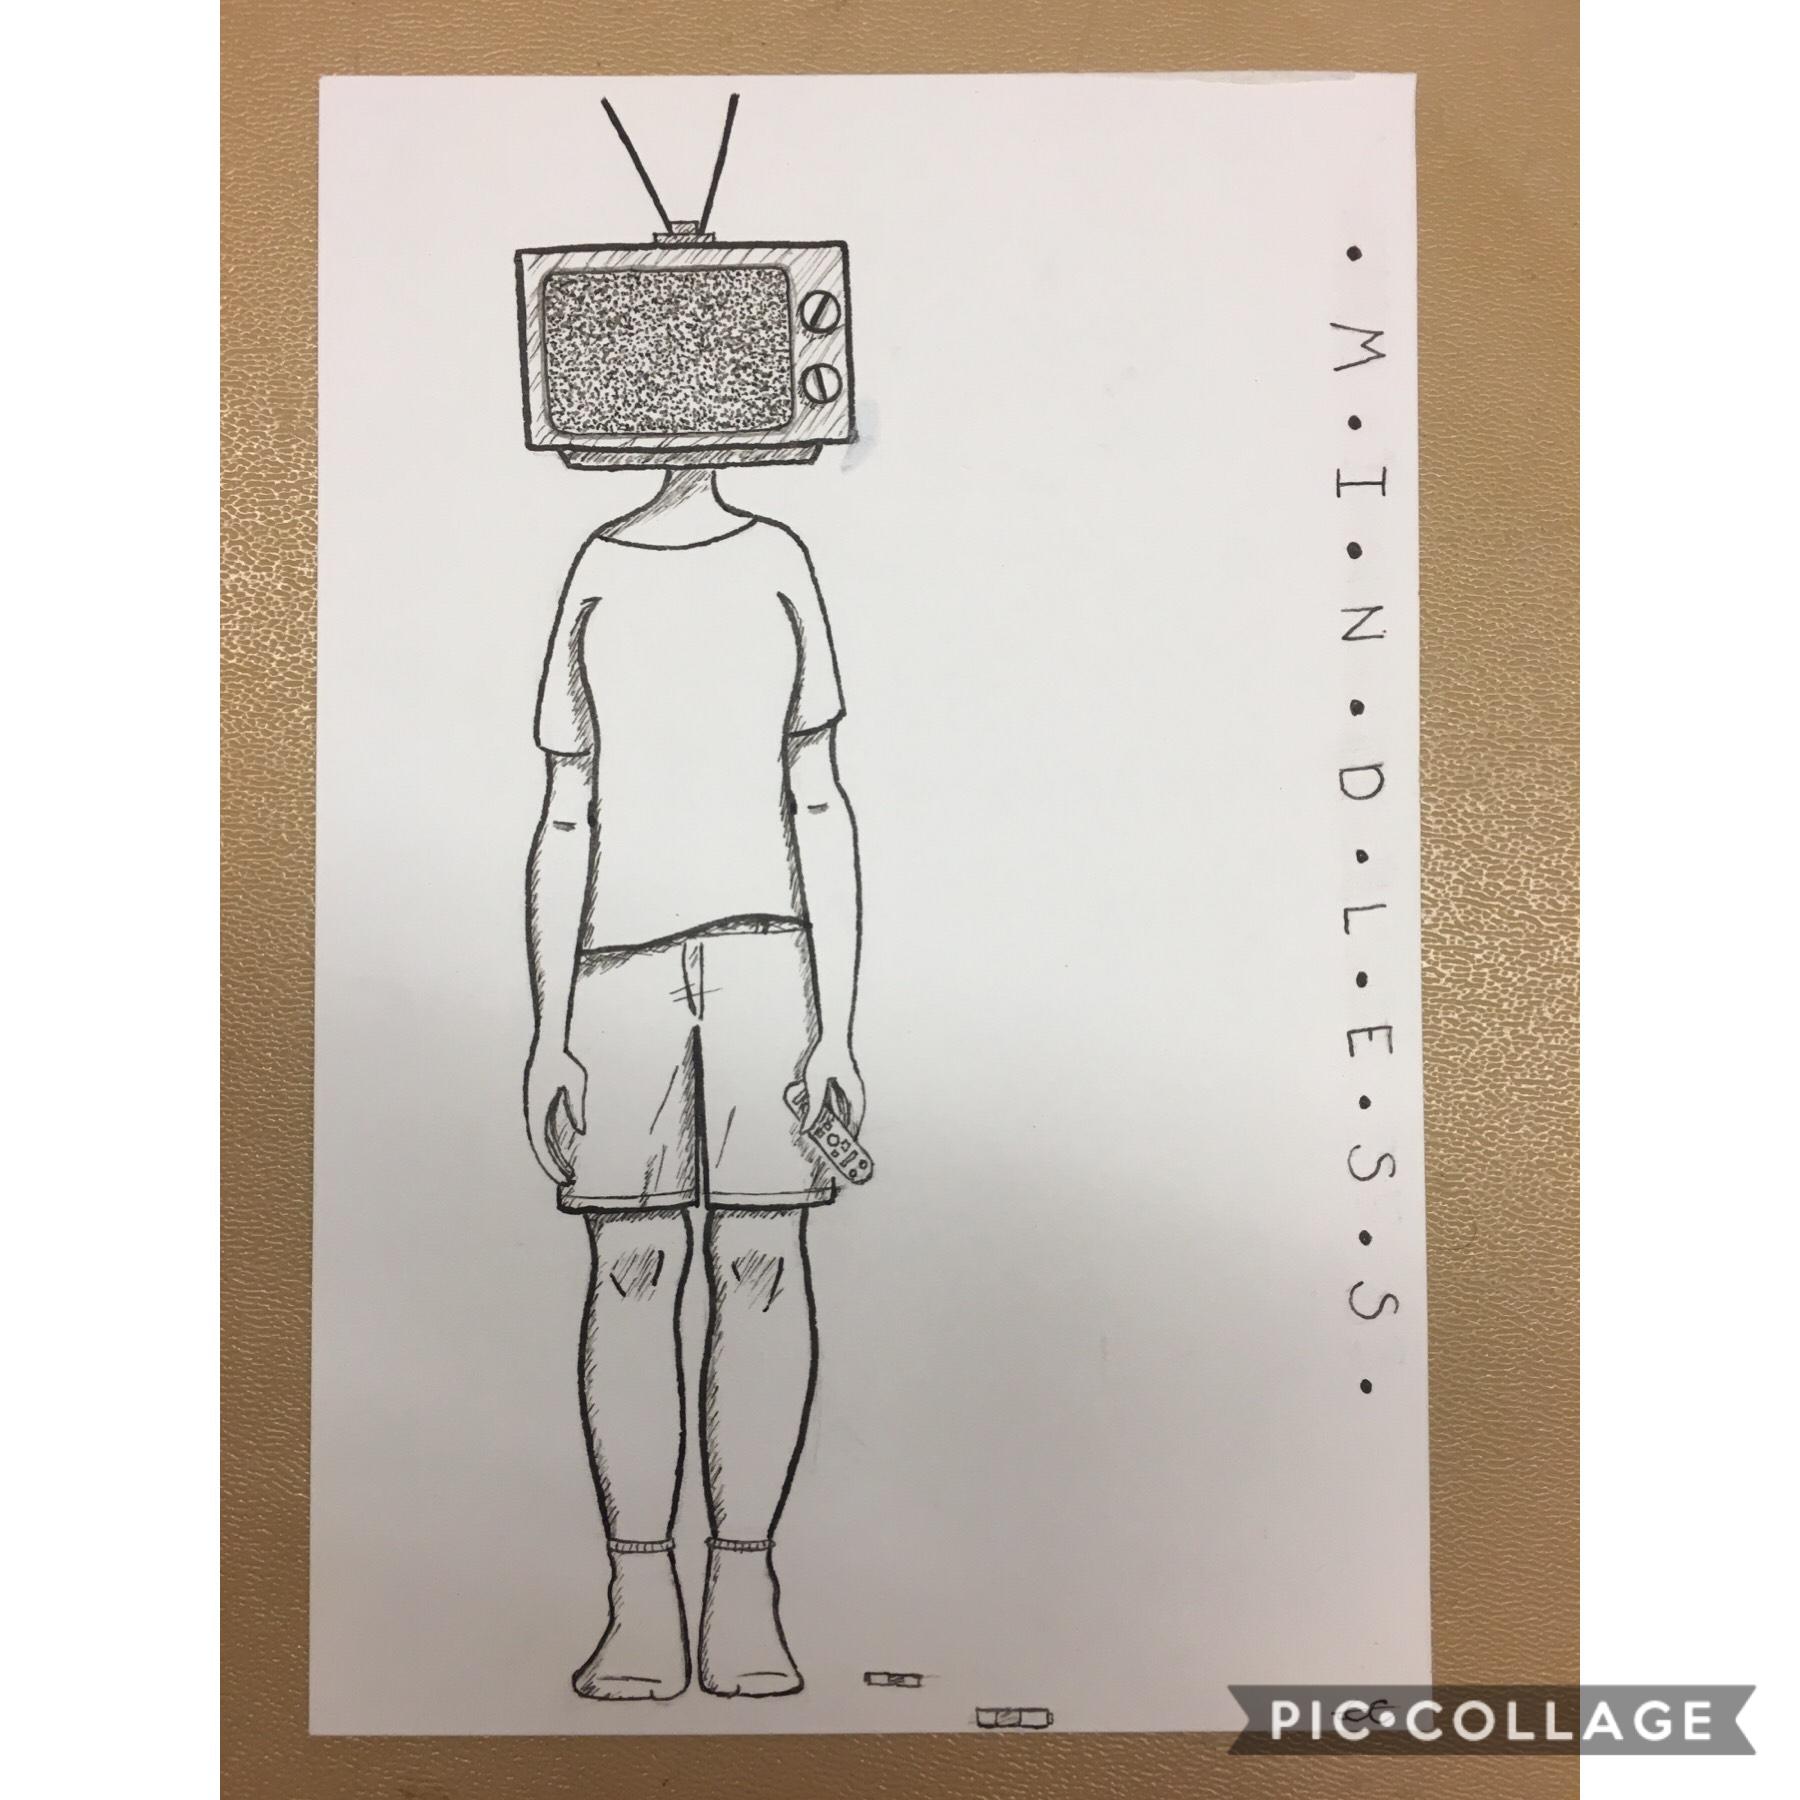 Inktober Day 2 - Mindless

Represents how with my ADD, my mind sometimes ends up feeling like TV static when I’m overwhelmed, and it’s hard to focus or even think.